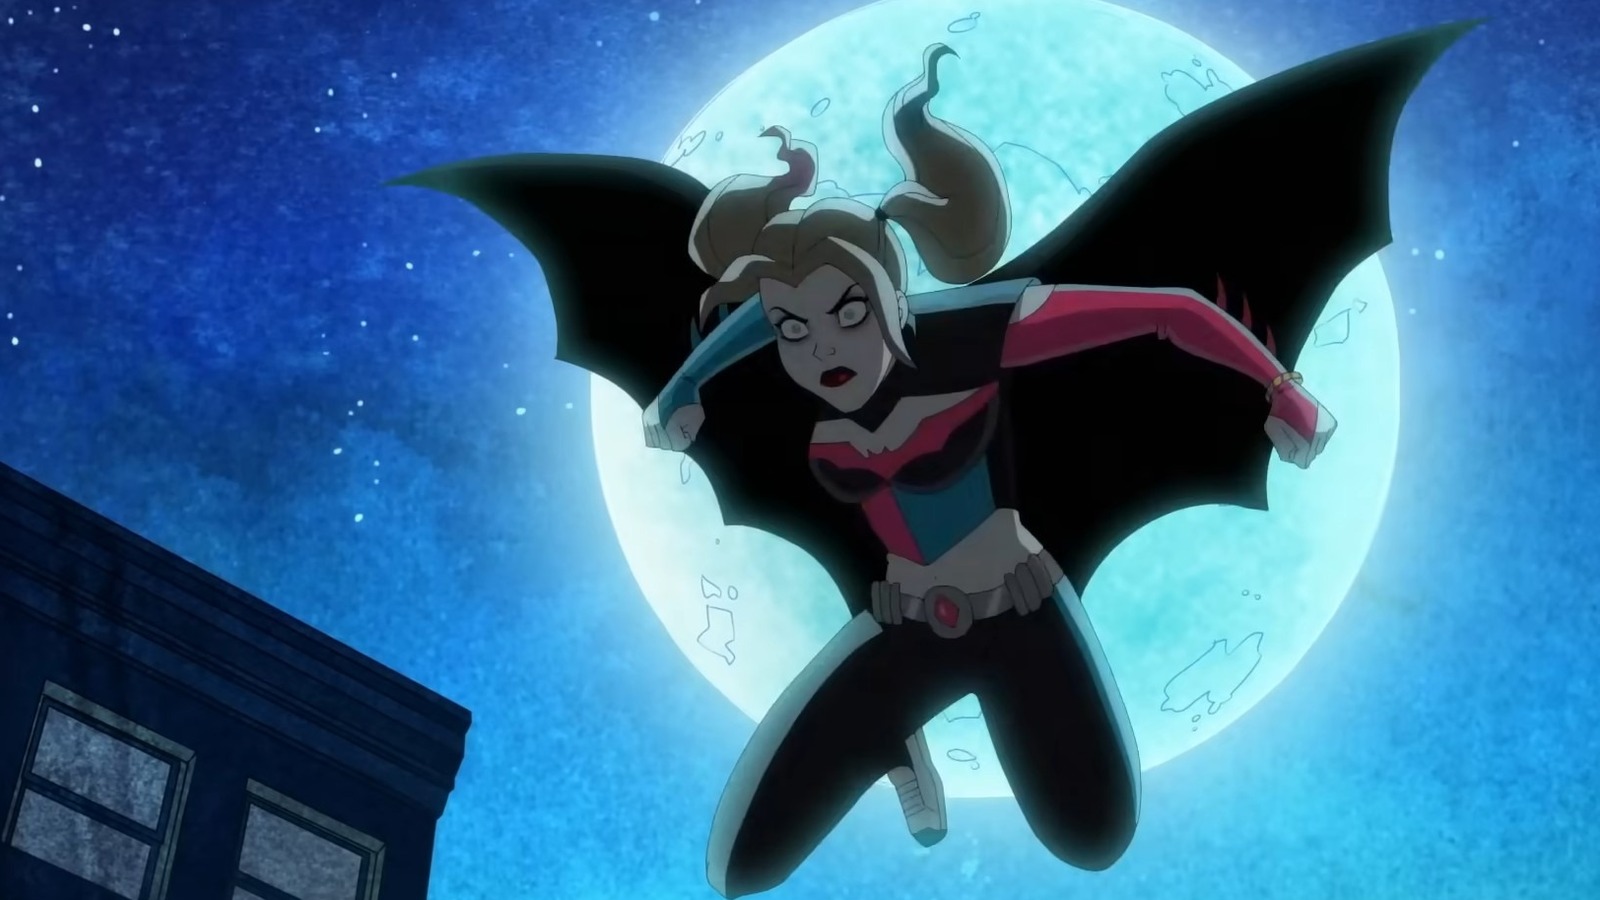 Harley Quinn animated series: Wild, chaotic, and deeply terrific - Vox